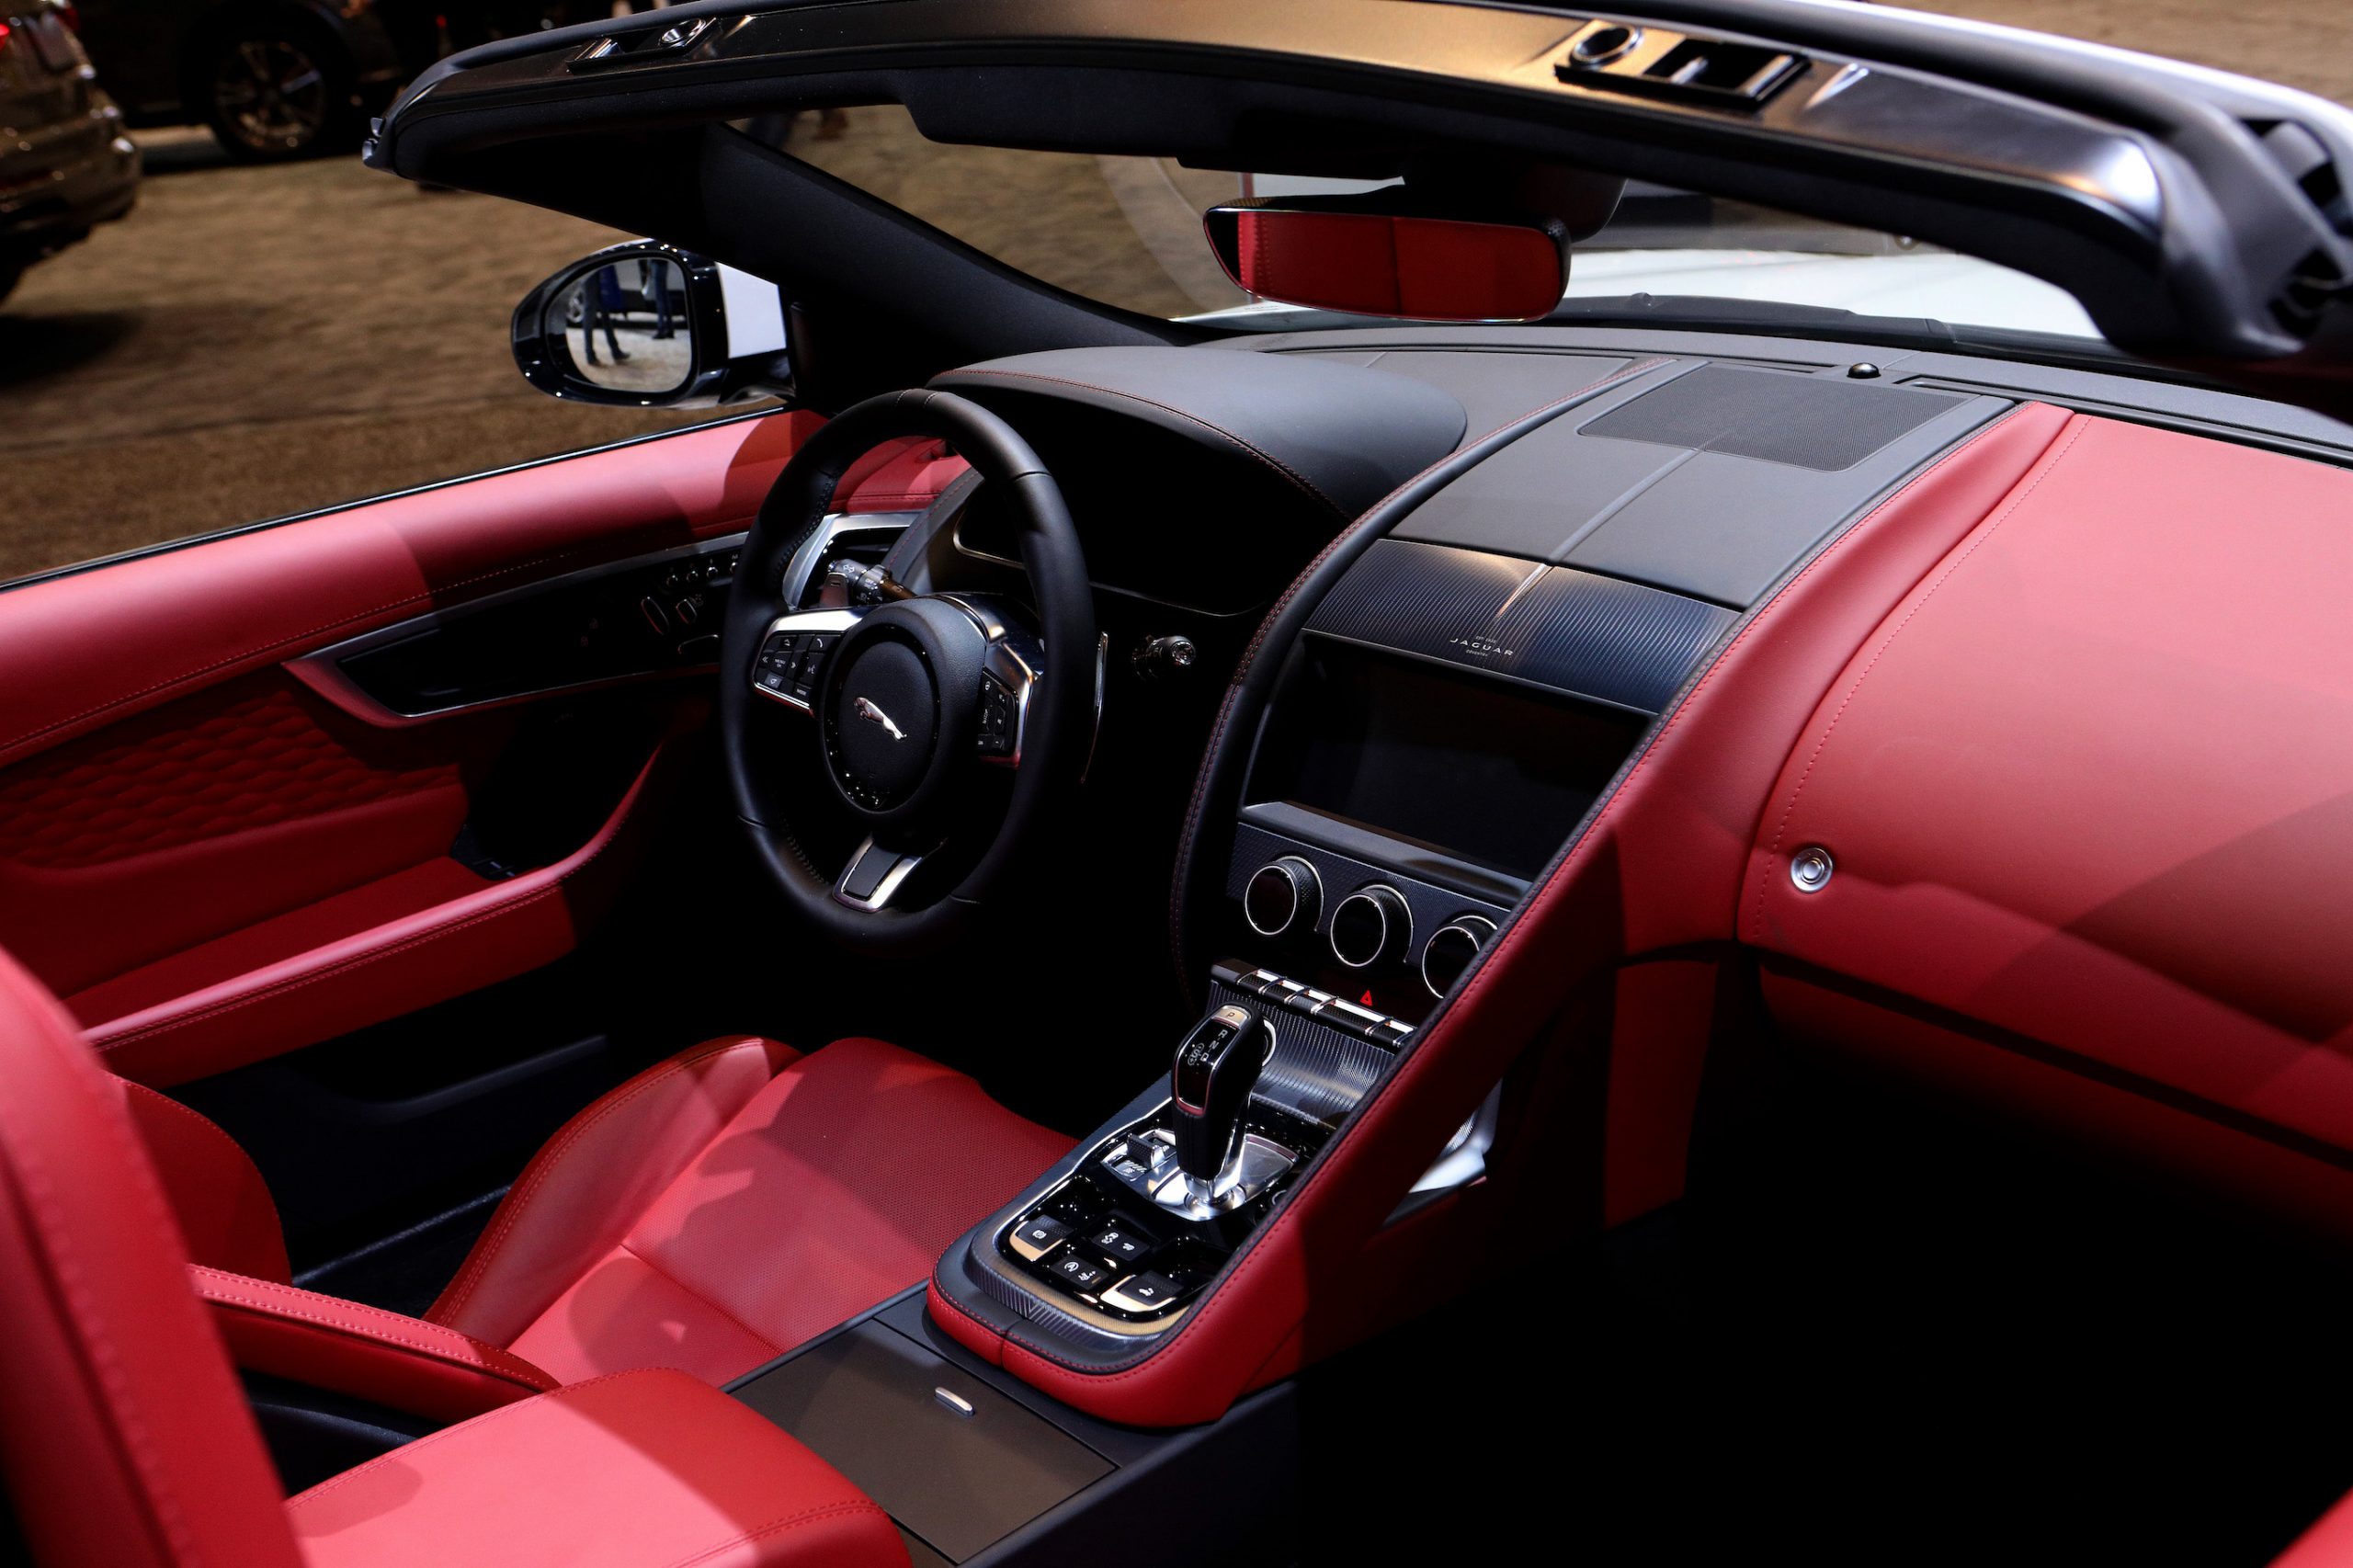 2020 Jaguar F-Type interior is on display at the 112th Annual Chicago Auto Show